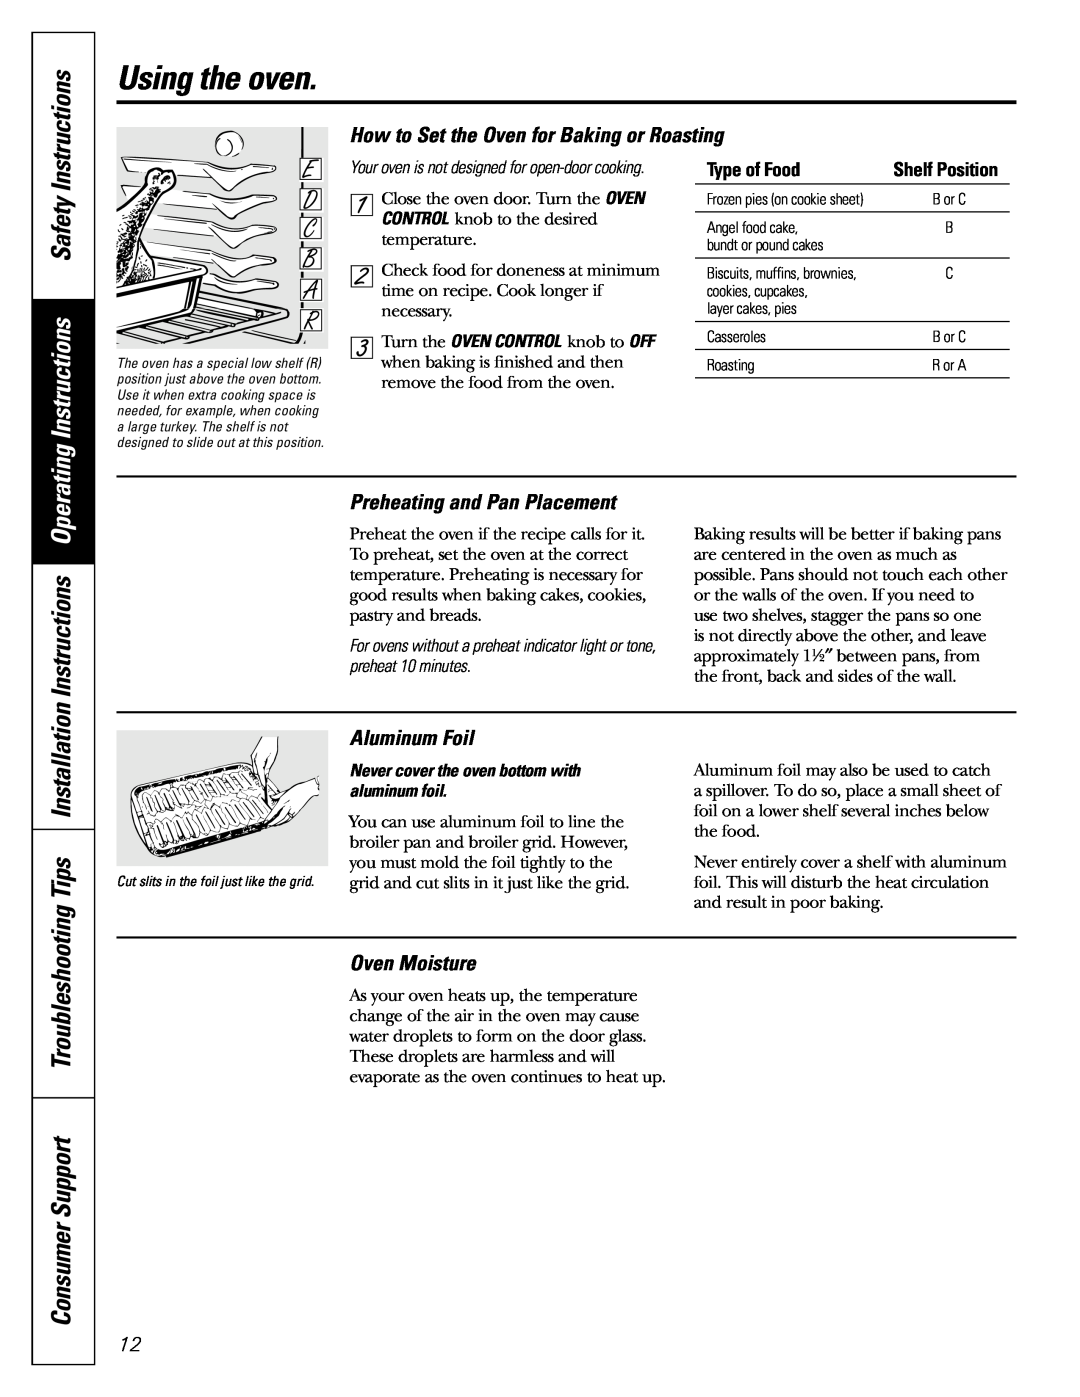 GE JGBS04, JGSS05 Instructions Safety, Instructions Operating, How to Set the Oven for Baking or Roasting, Aluminum Foil 